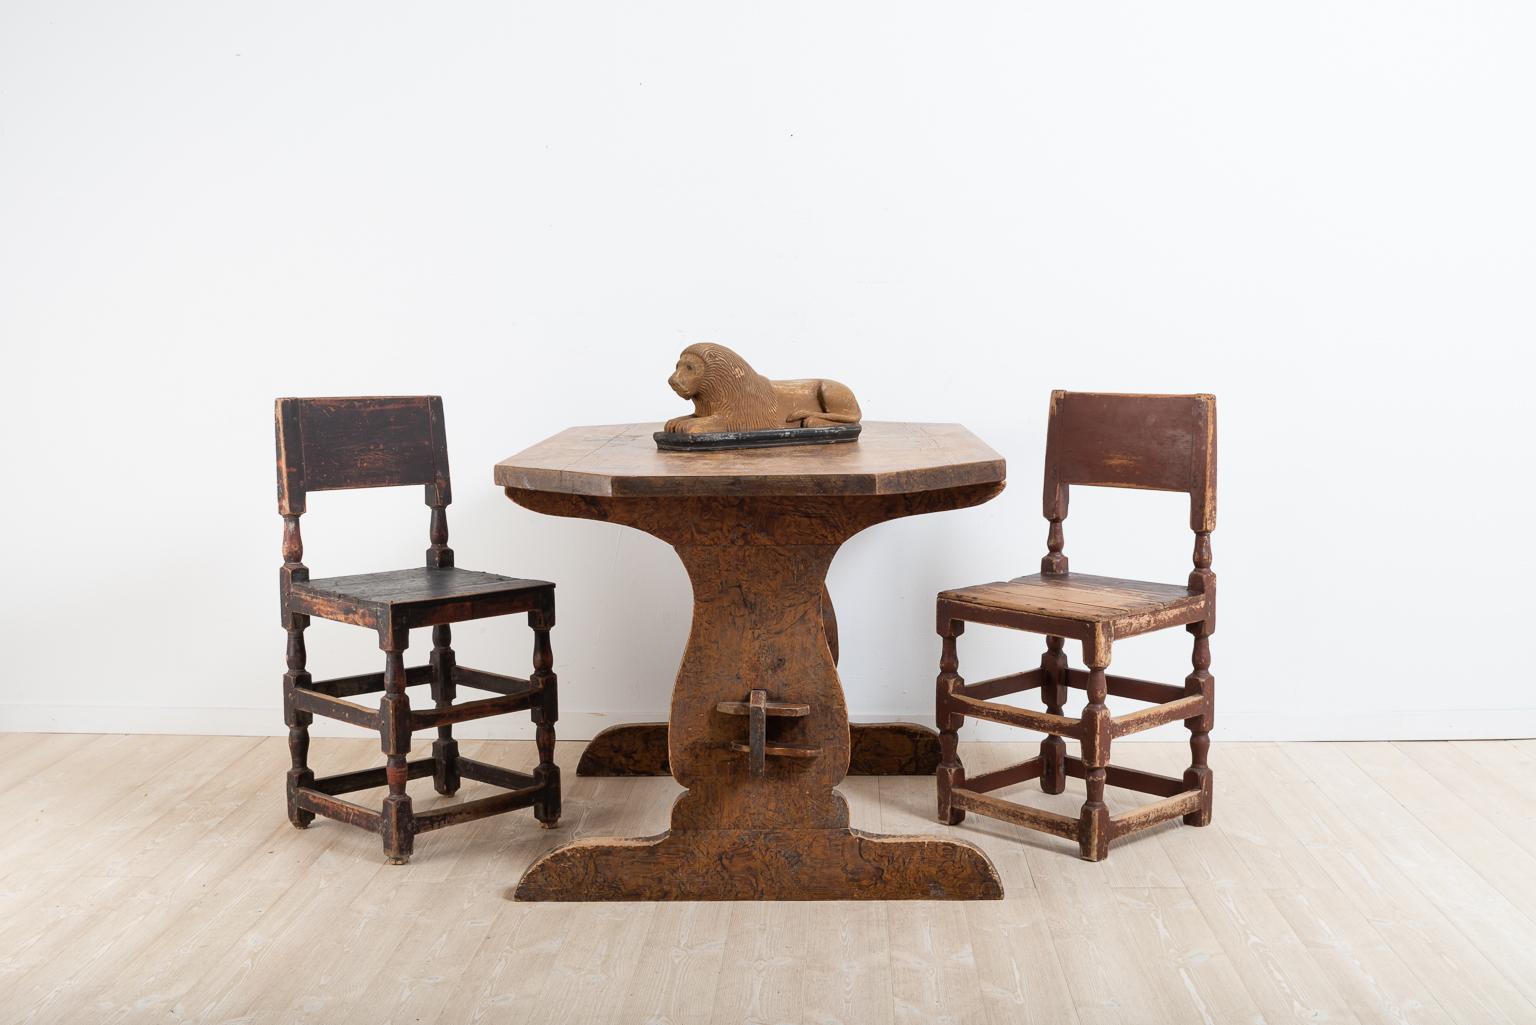 Swedish Folk Art dining table. The model is one of the older and the table has a robust construction. Detached tabletop resting on a leg frame of two trestles. Original imitation paint and an untouched original surface with good patina over the